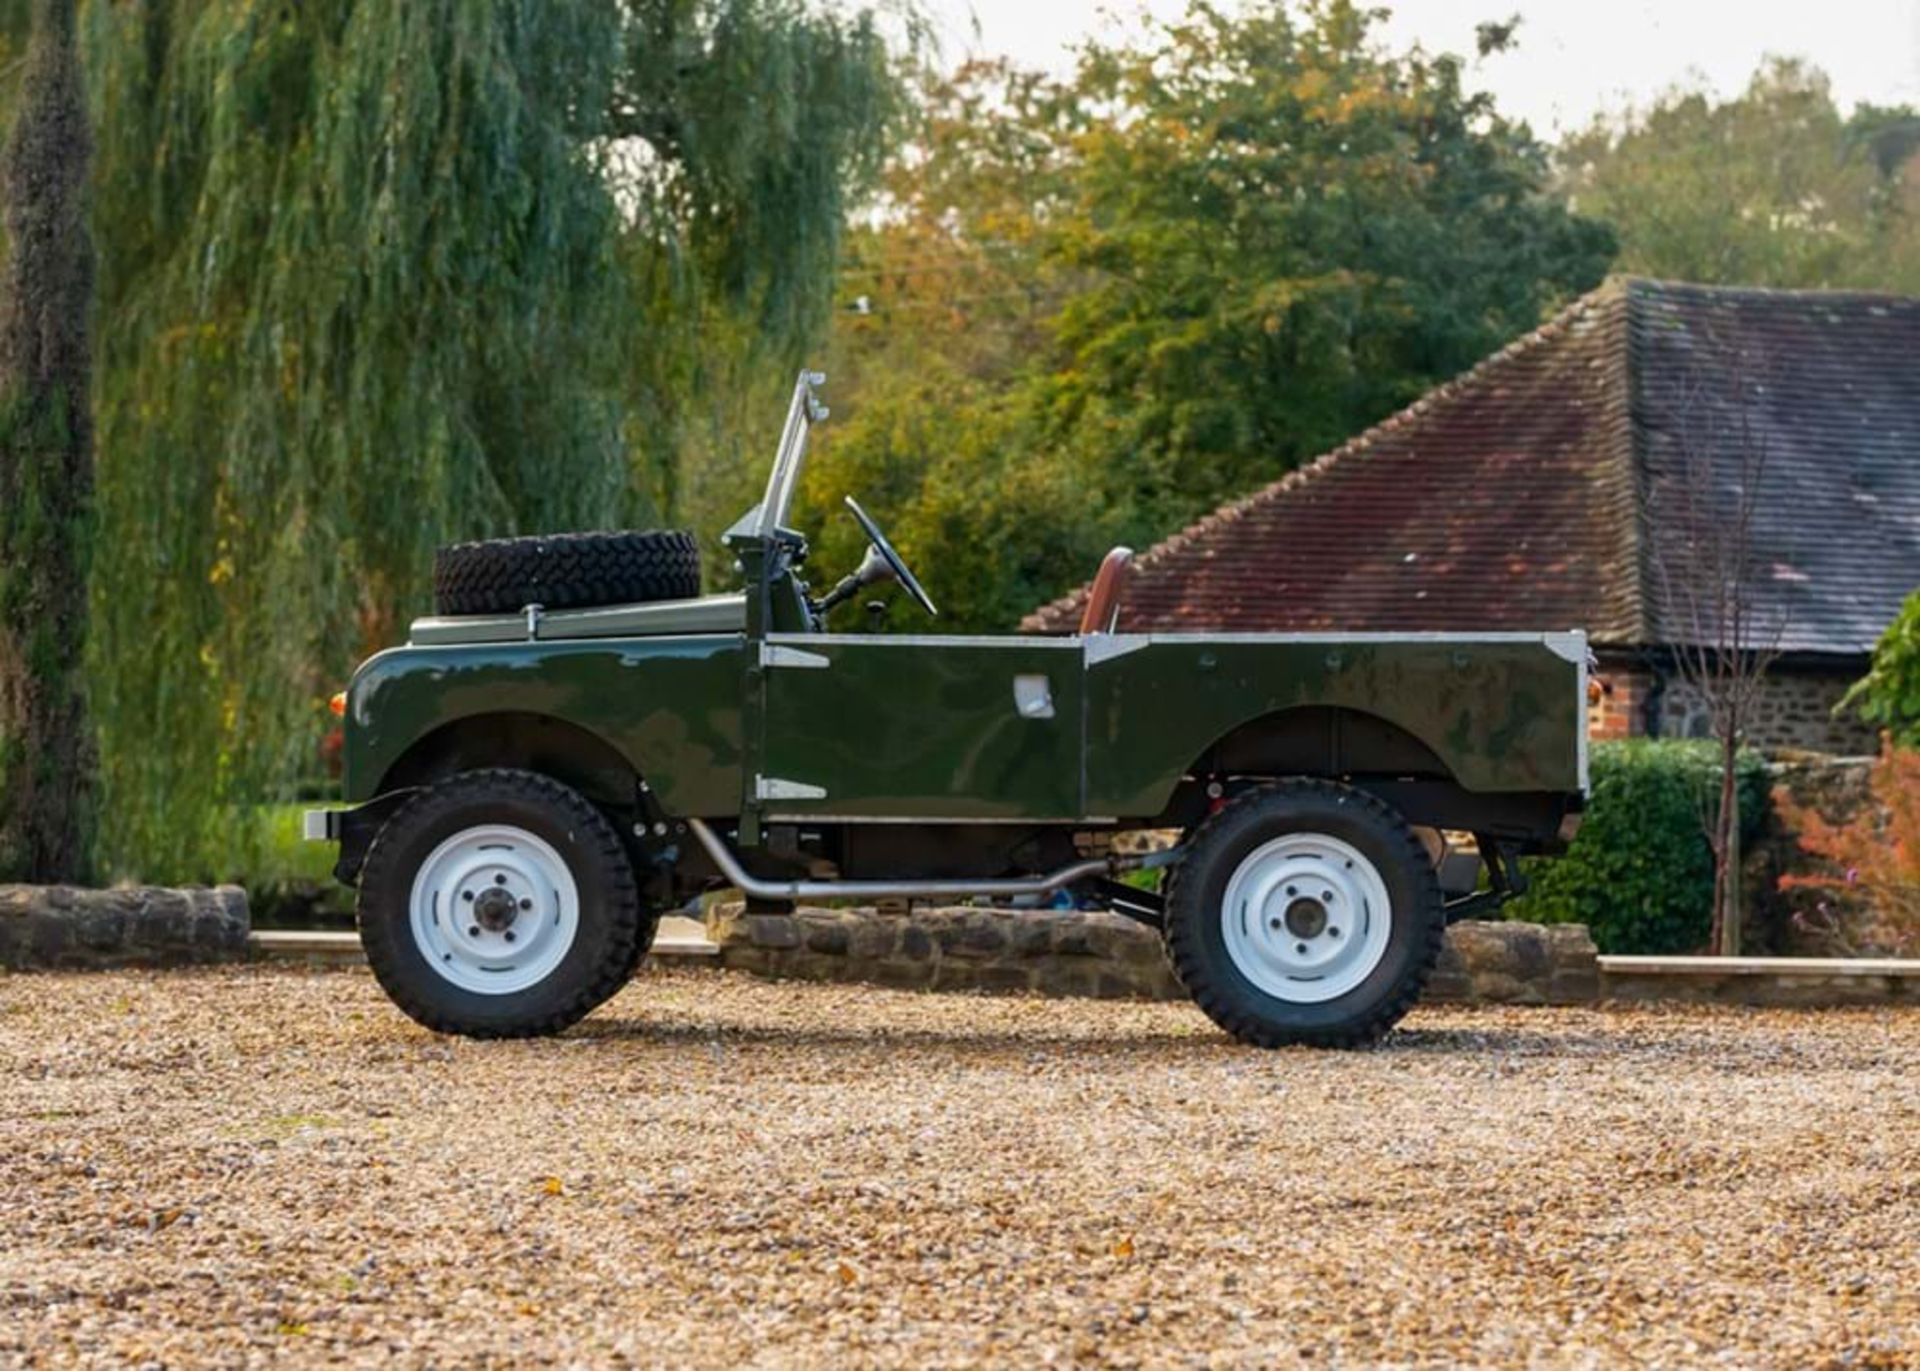 1955 Land Rover Series I (86") - Image 8 of 10